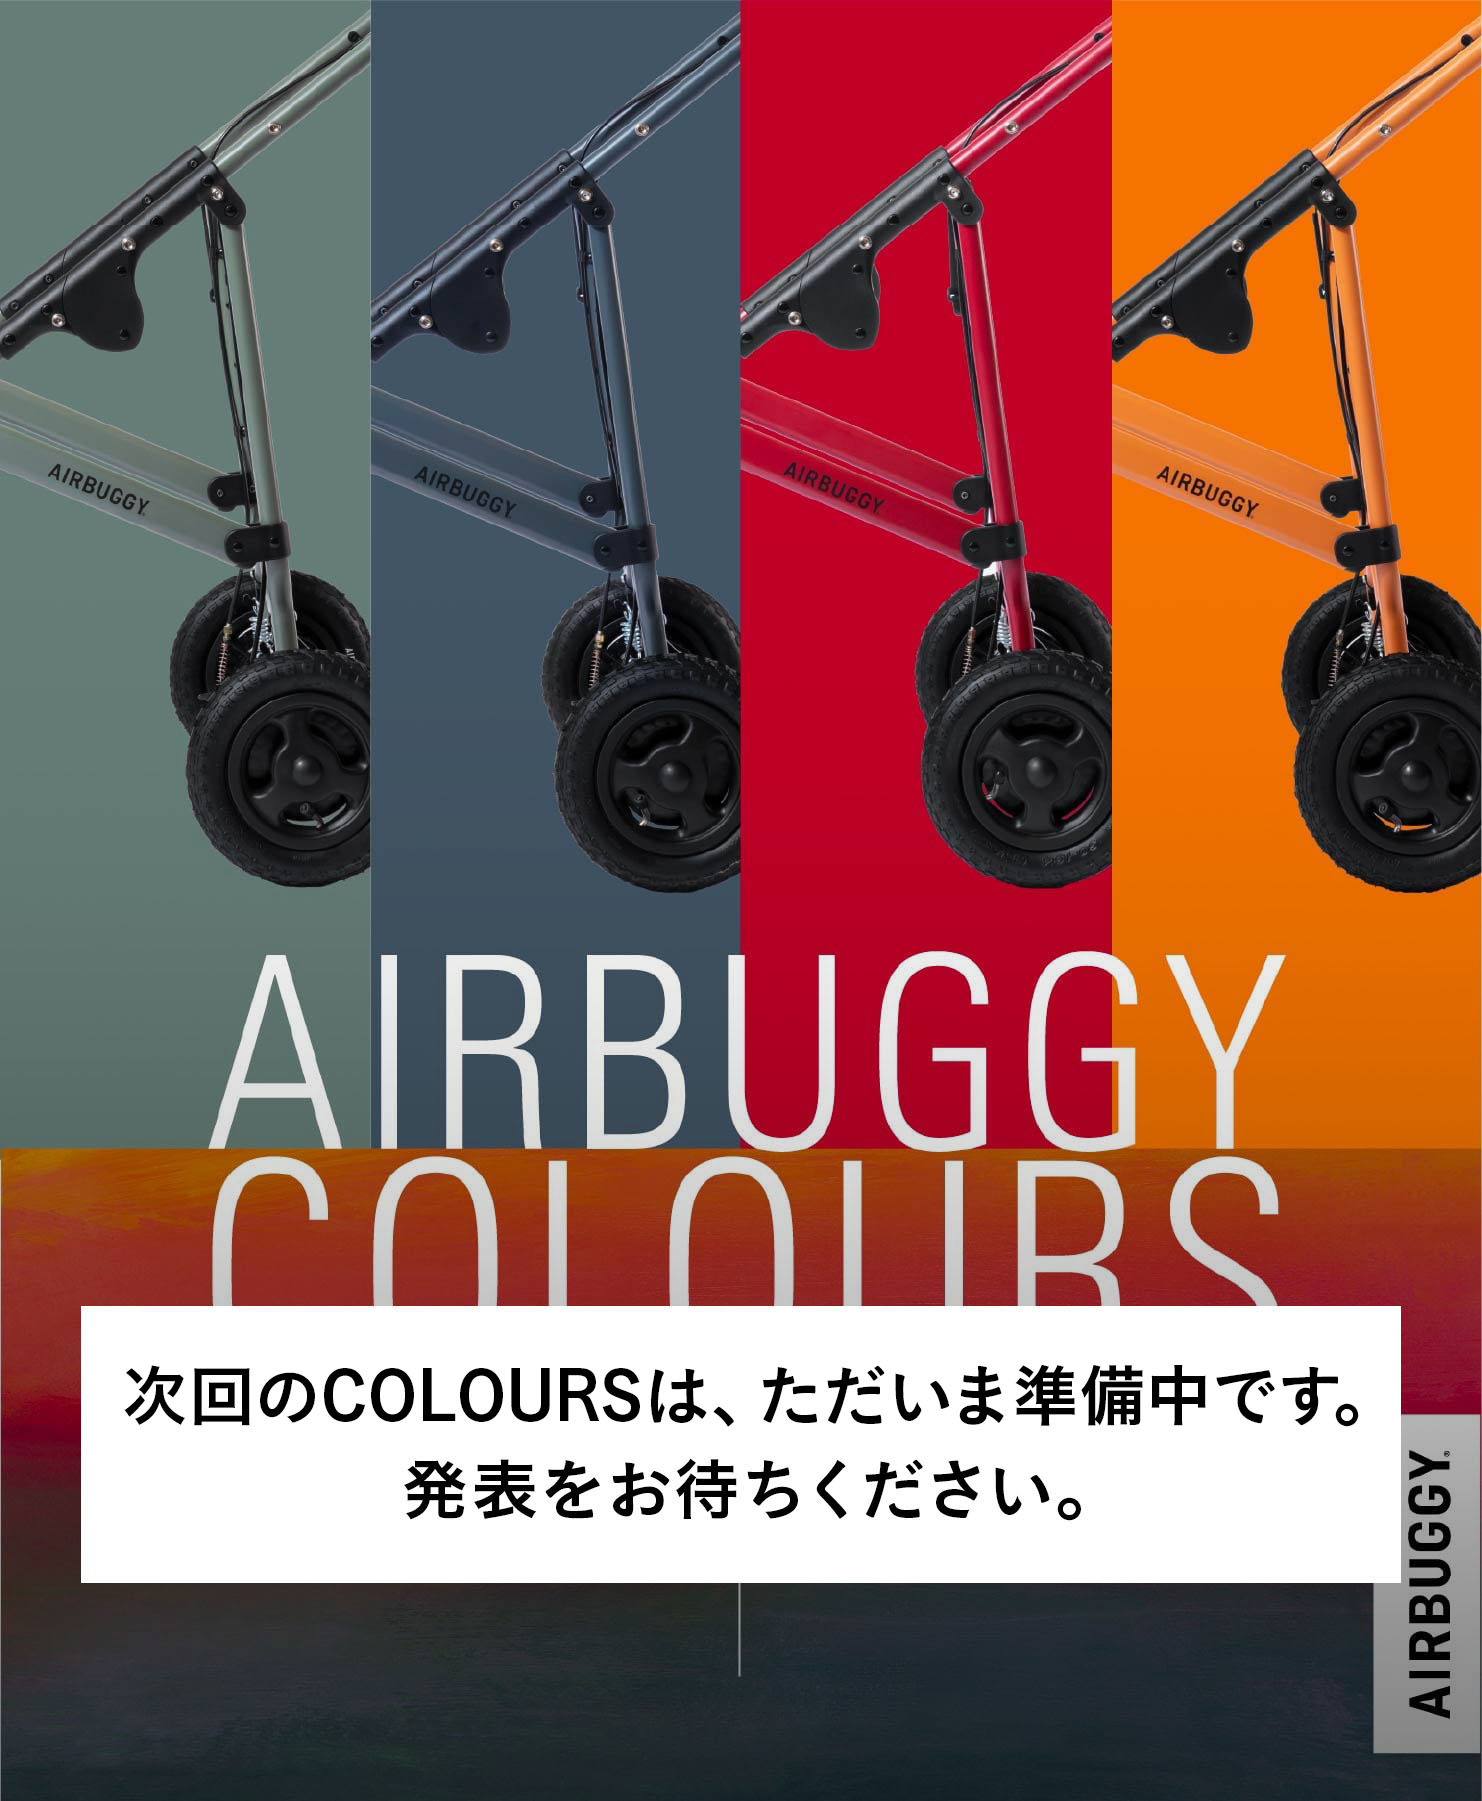 AIRBUGGY COLOURS 2021 Autumn & Winter